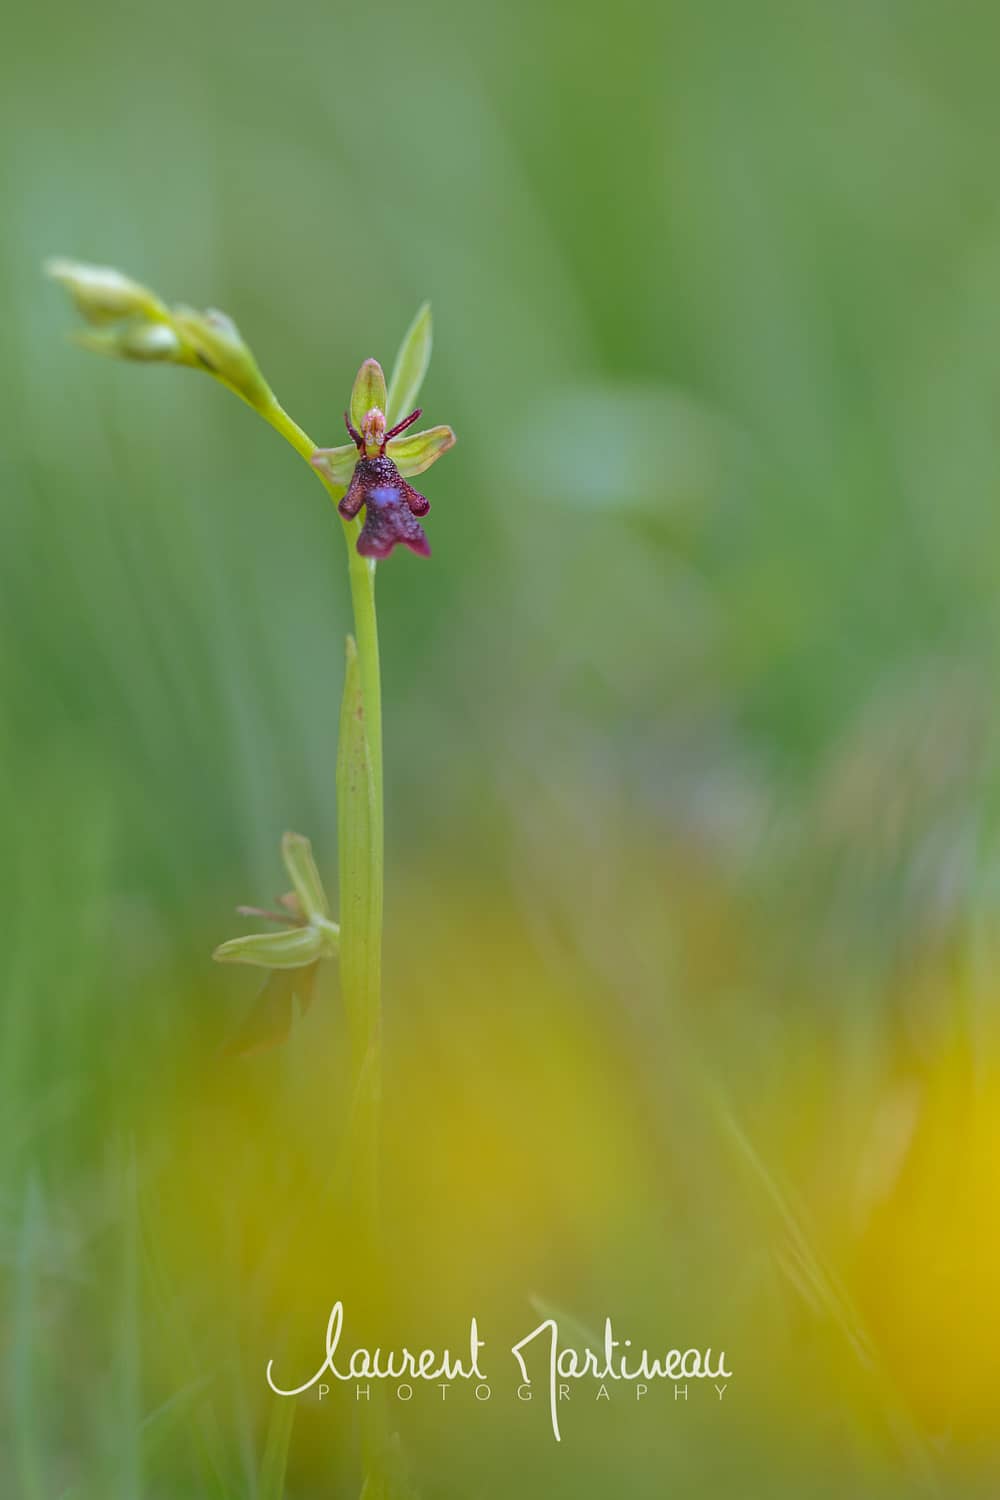 Ophrys mouche